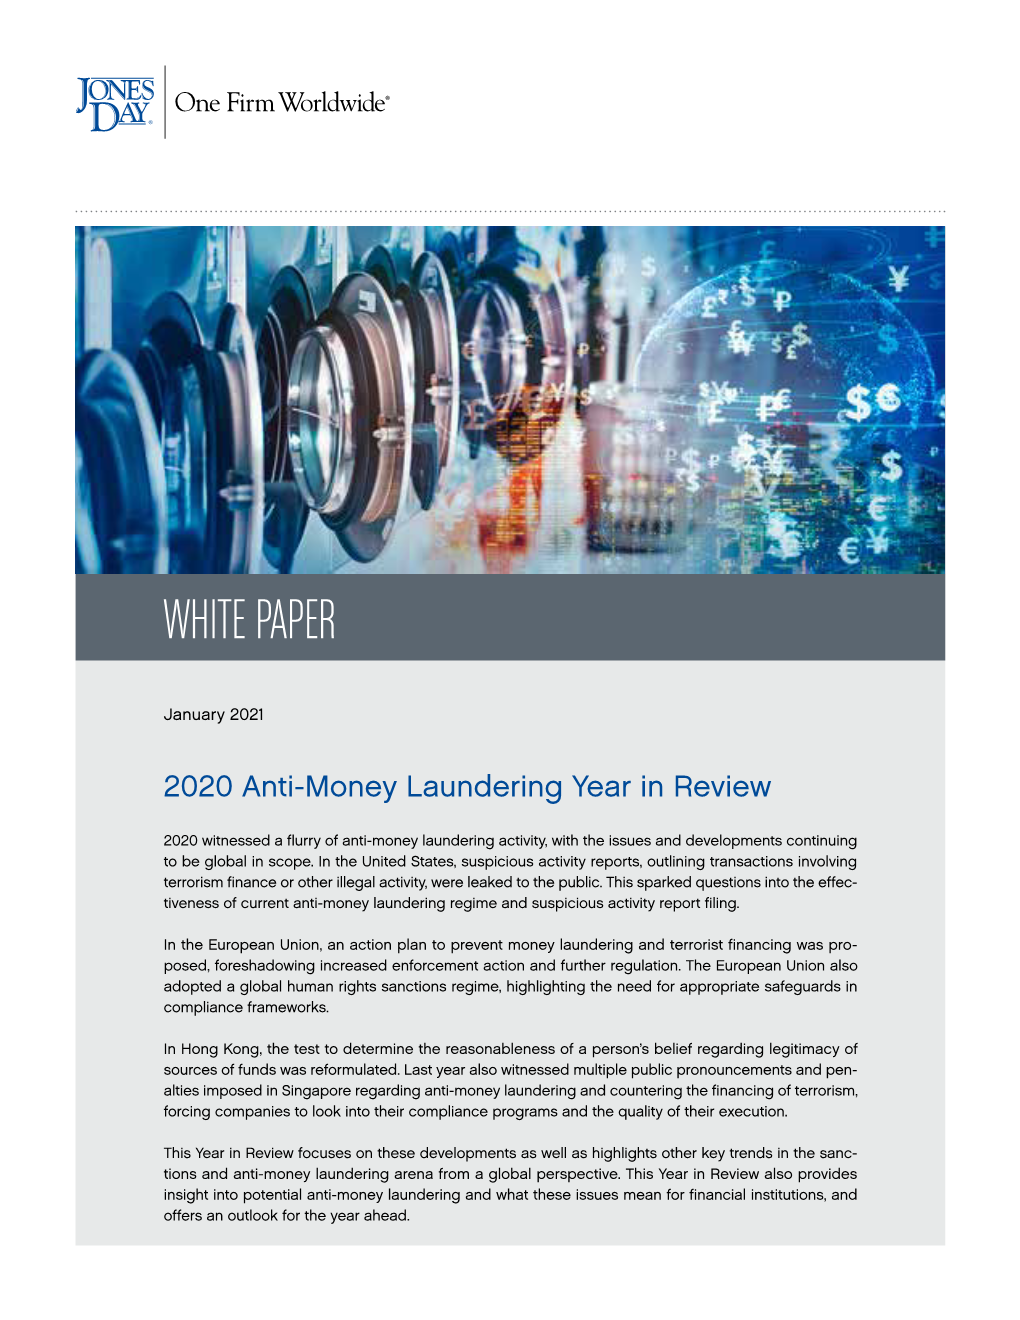 2020 Anti-Money Laundering Year in Review